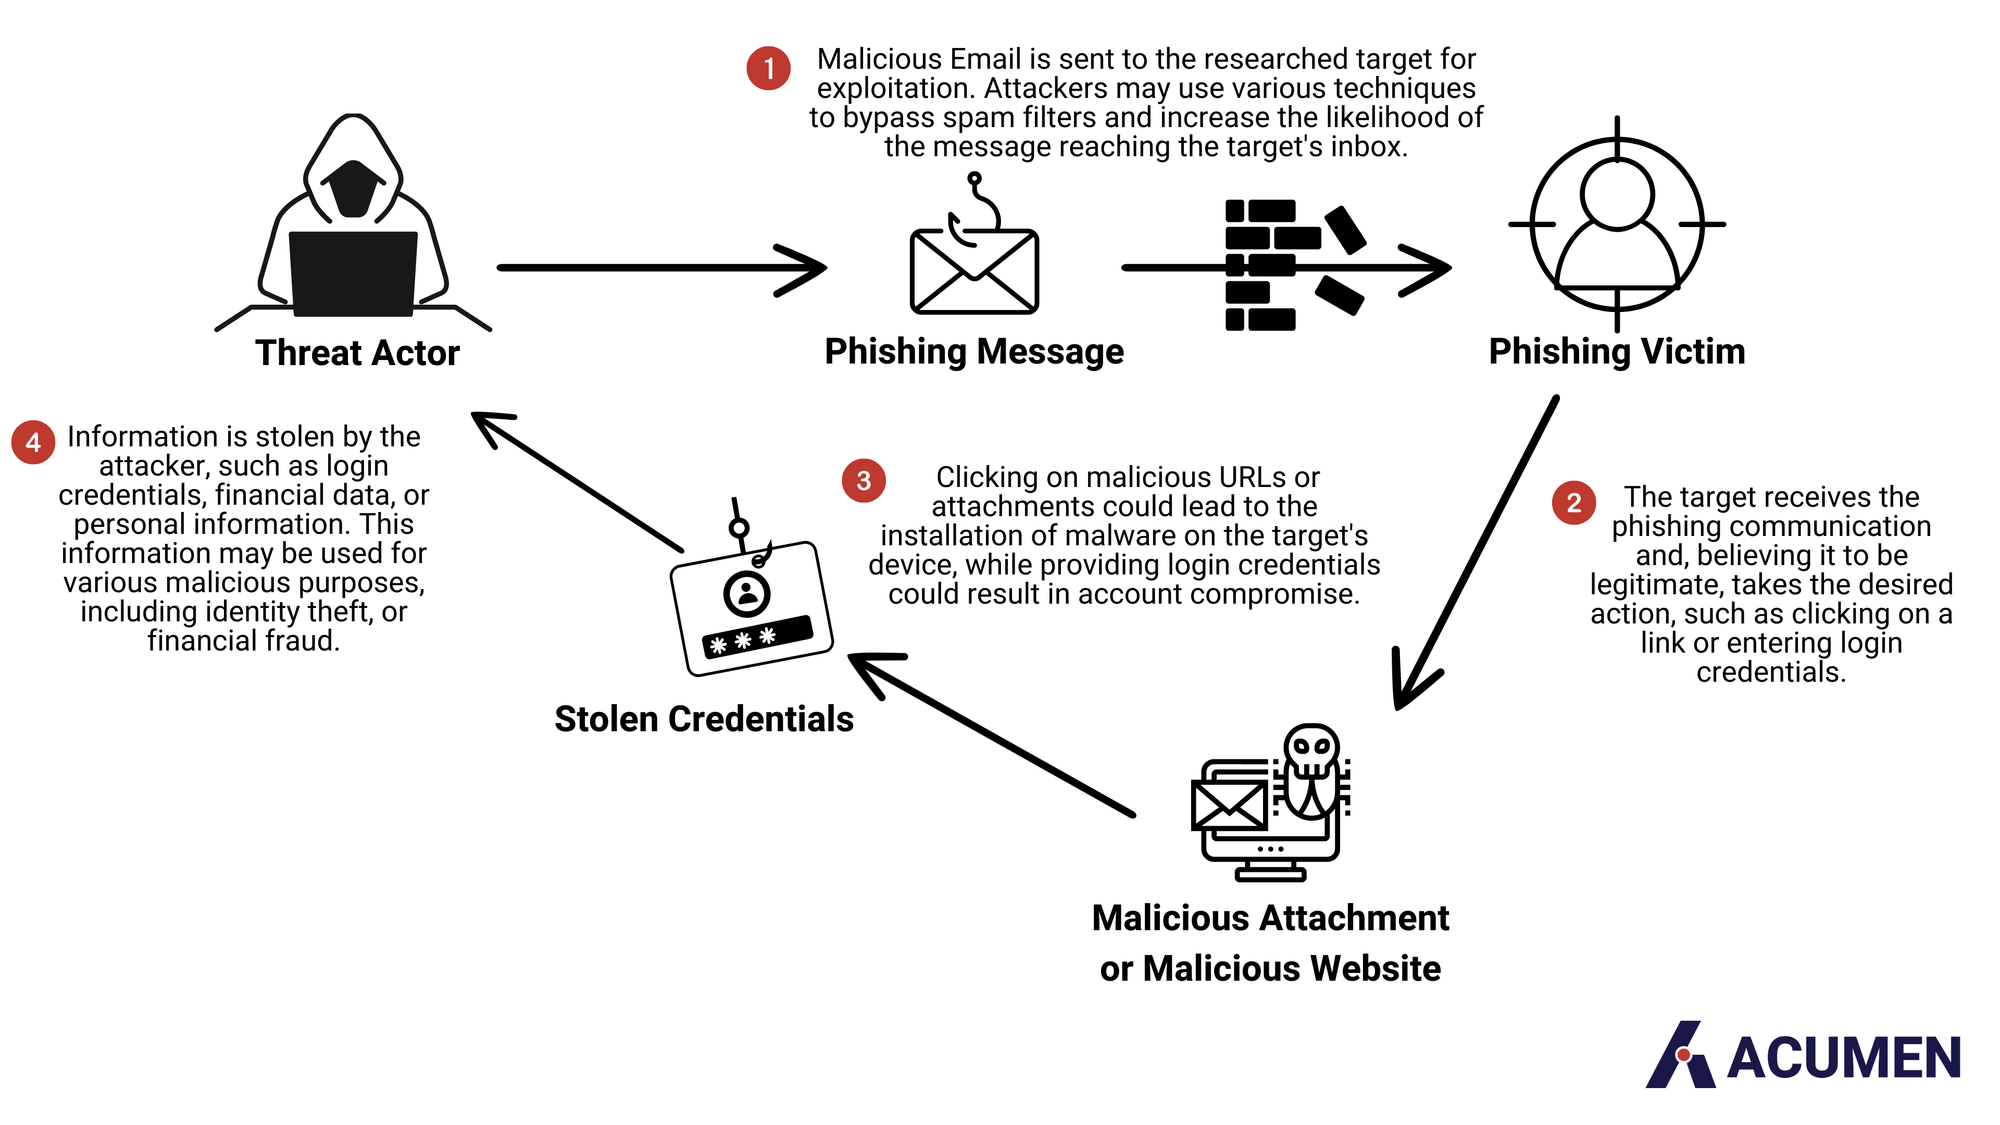 Behind the Bait: A Guide on Phishing and How to Stay Safe